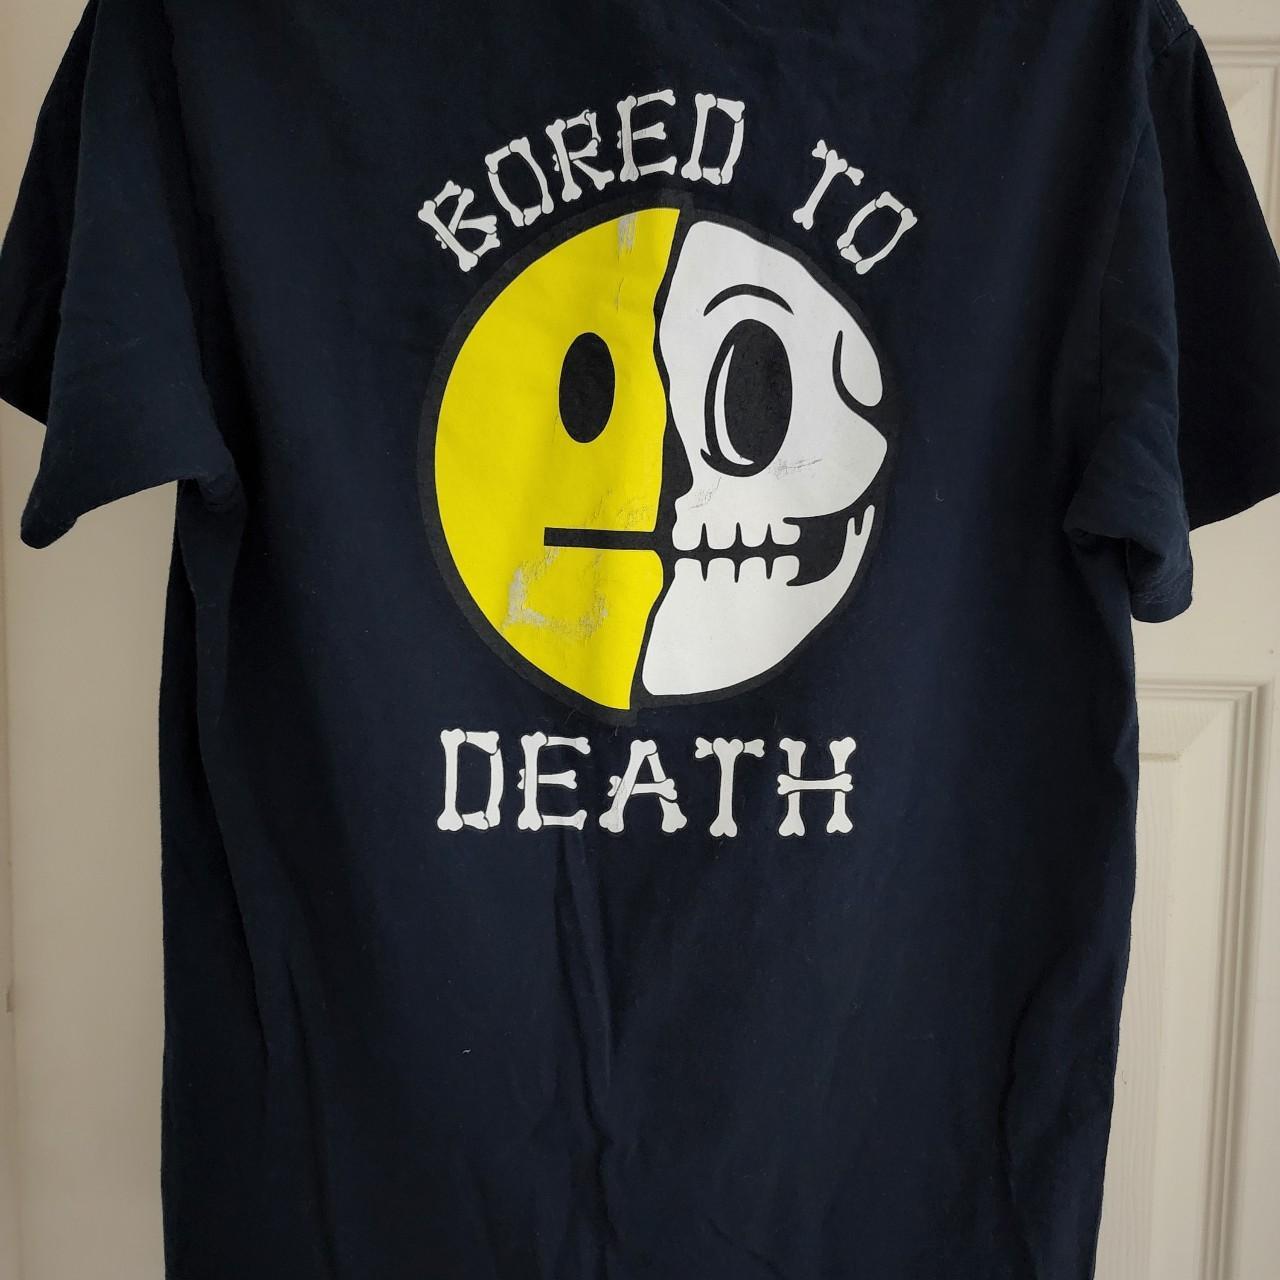 Product Image 1 - Boring Life Club
Bored To Death